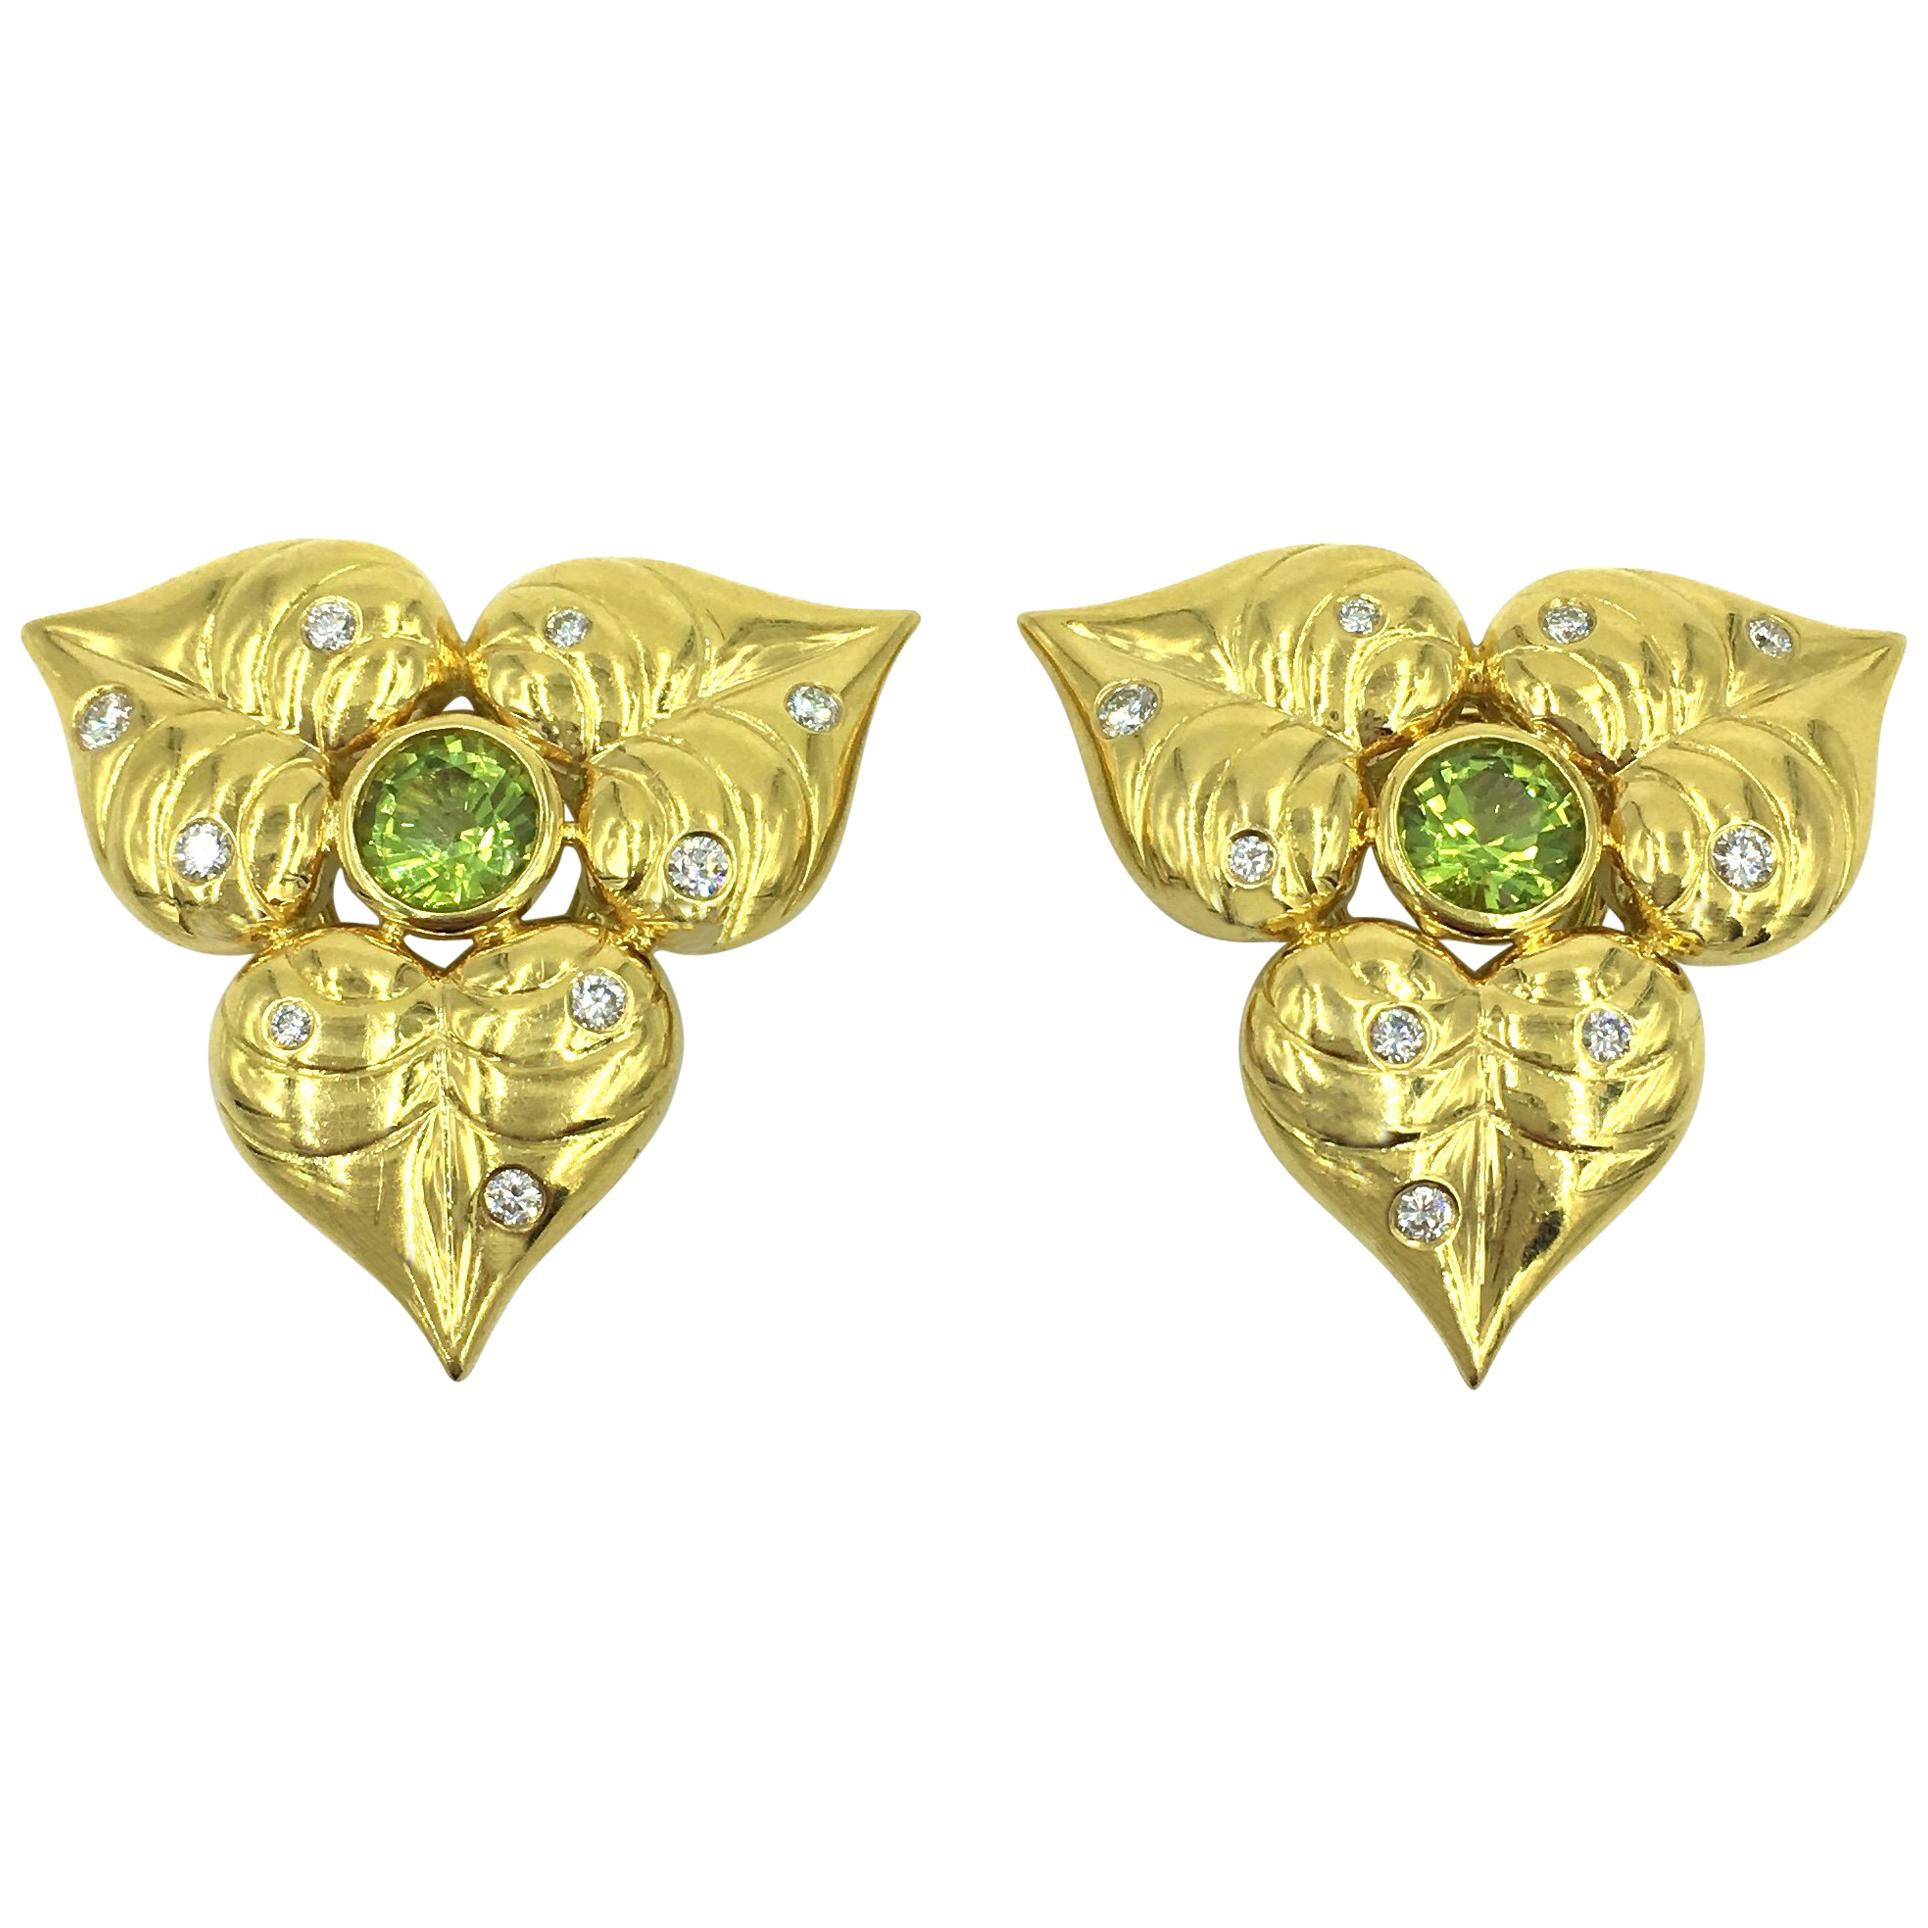 Pair of Gold and Peridot Flower Earrings